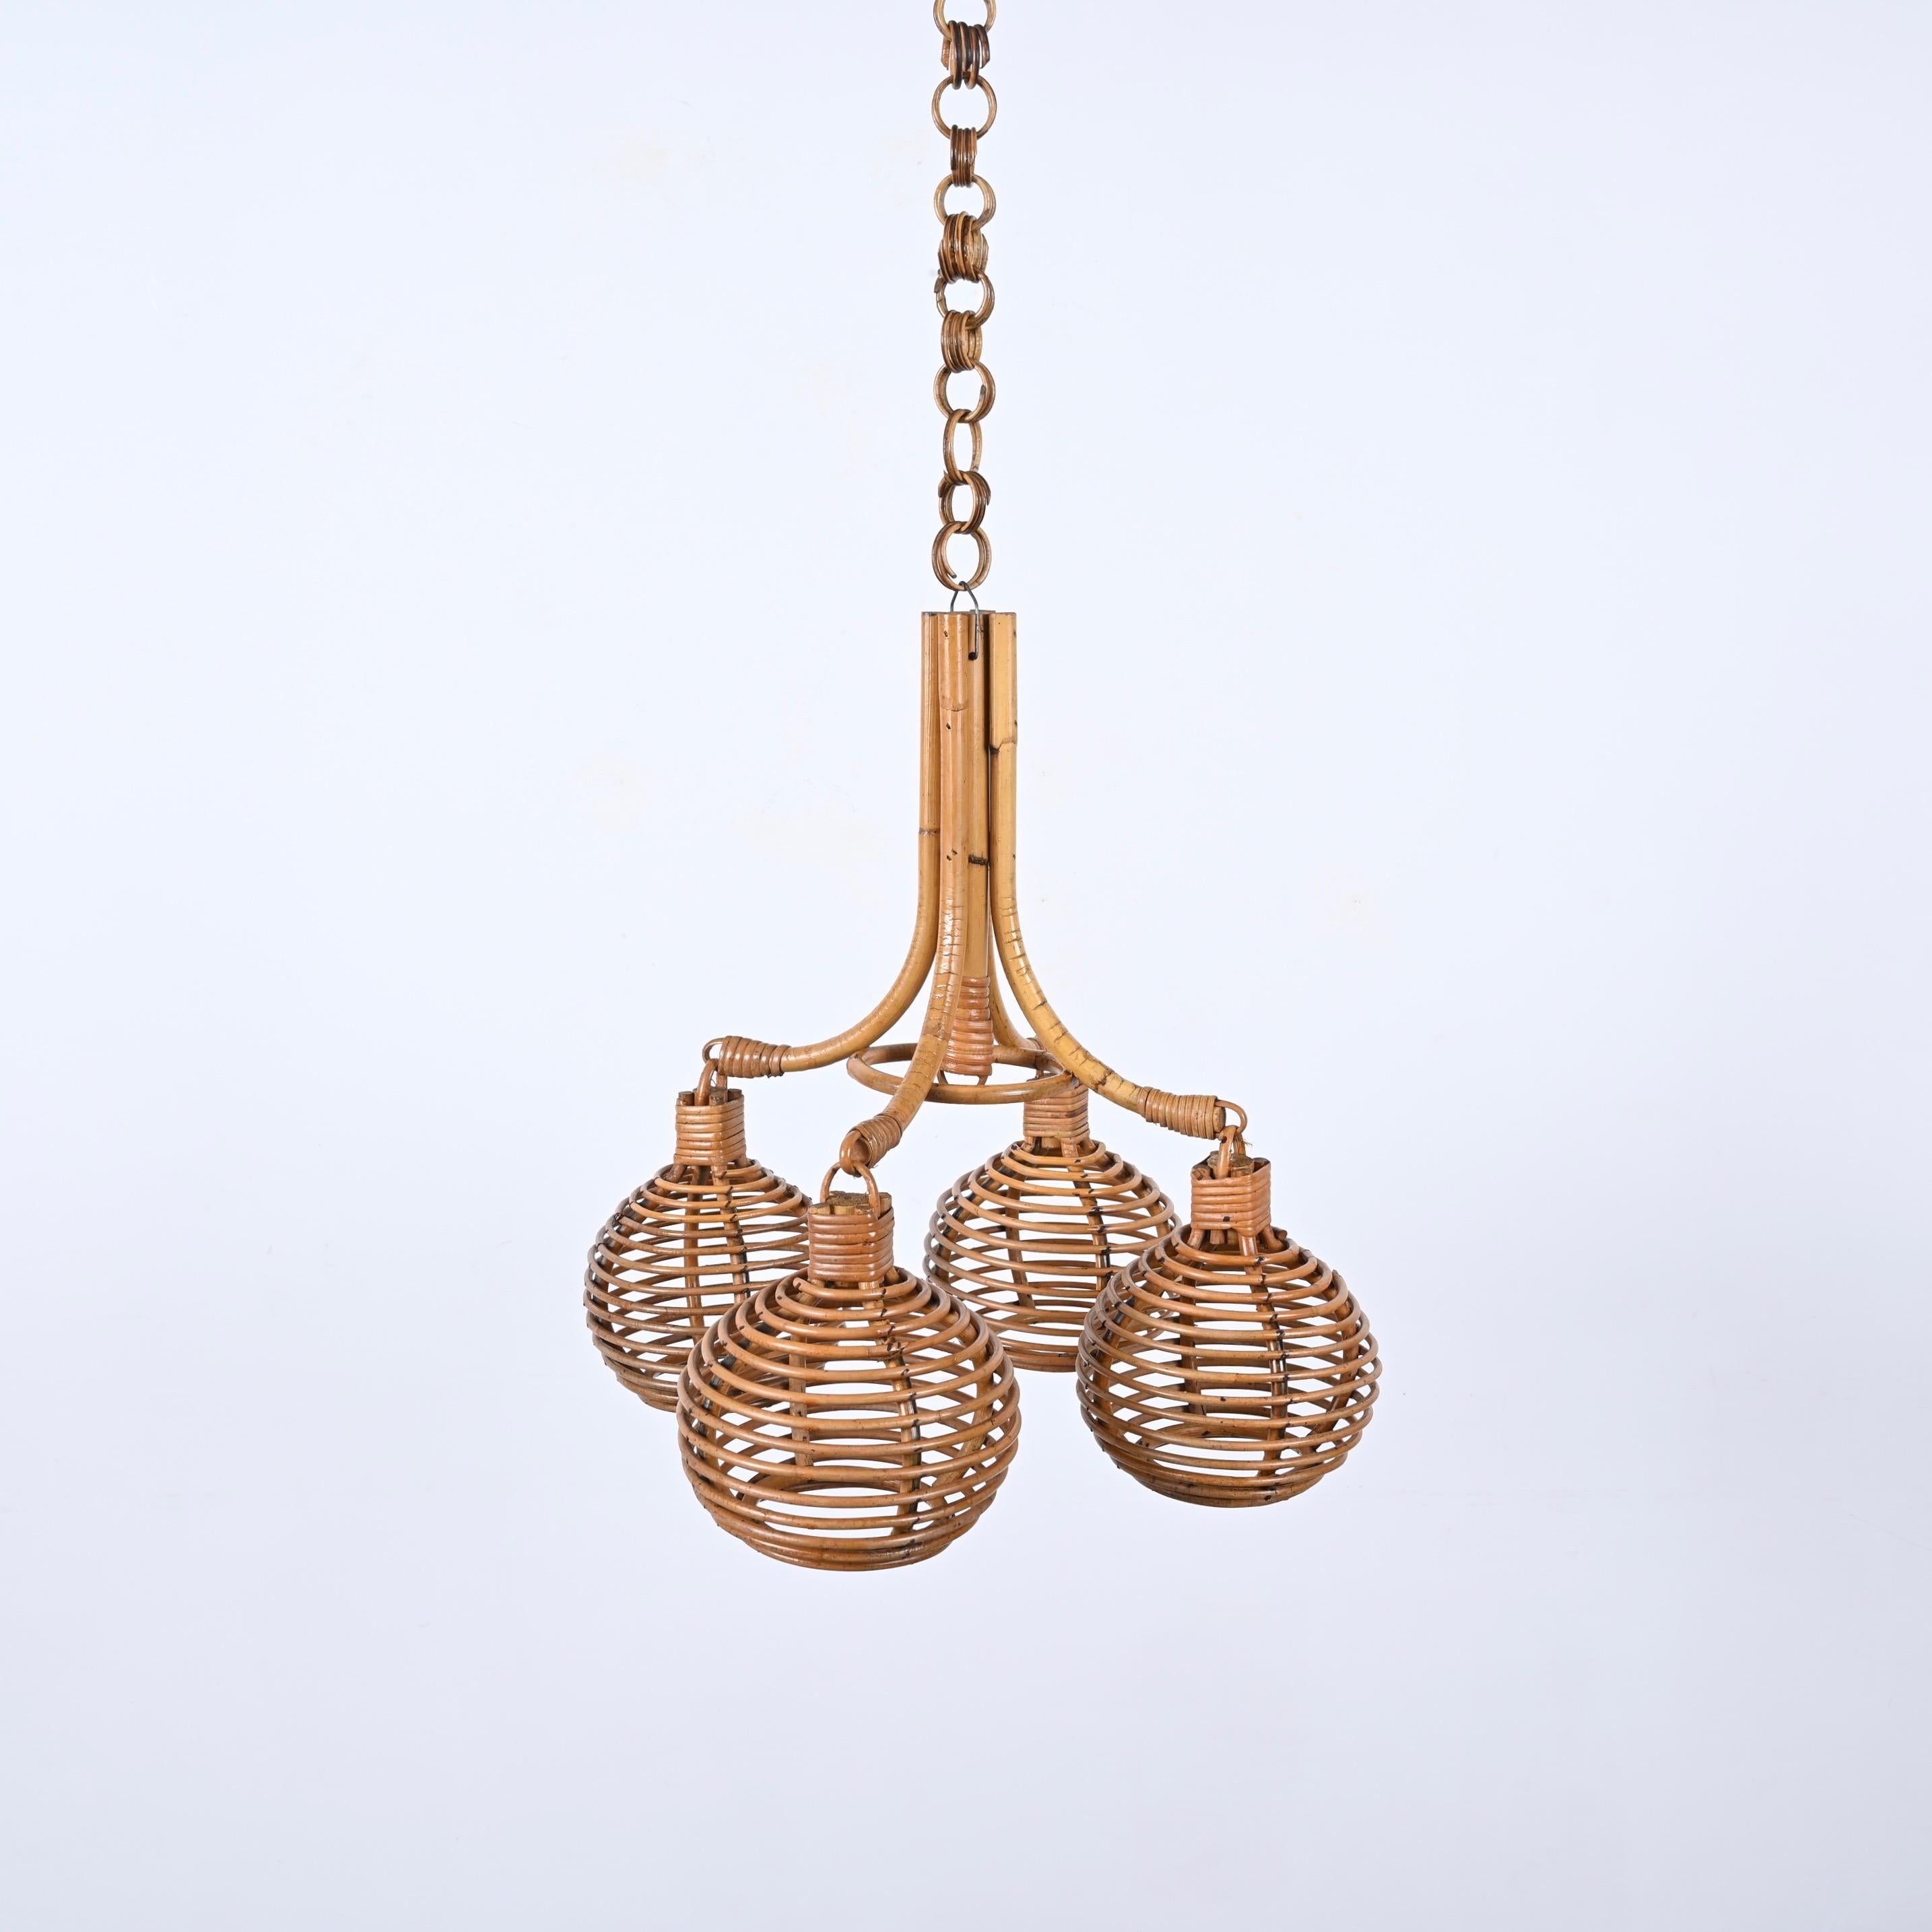 Midcentury French Riviera Bambo and Rattan 4 Sphere Italian Chandelier, 1960s 7